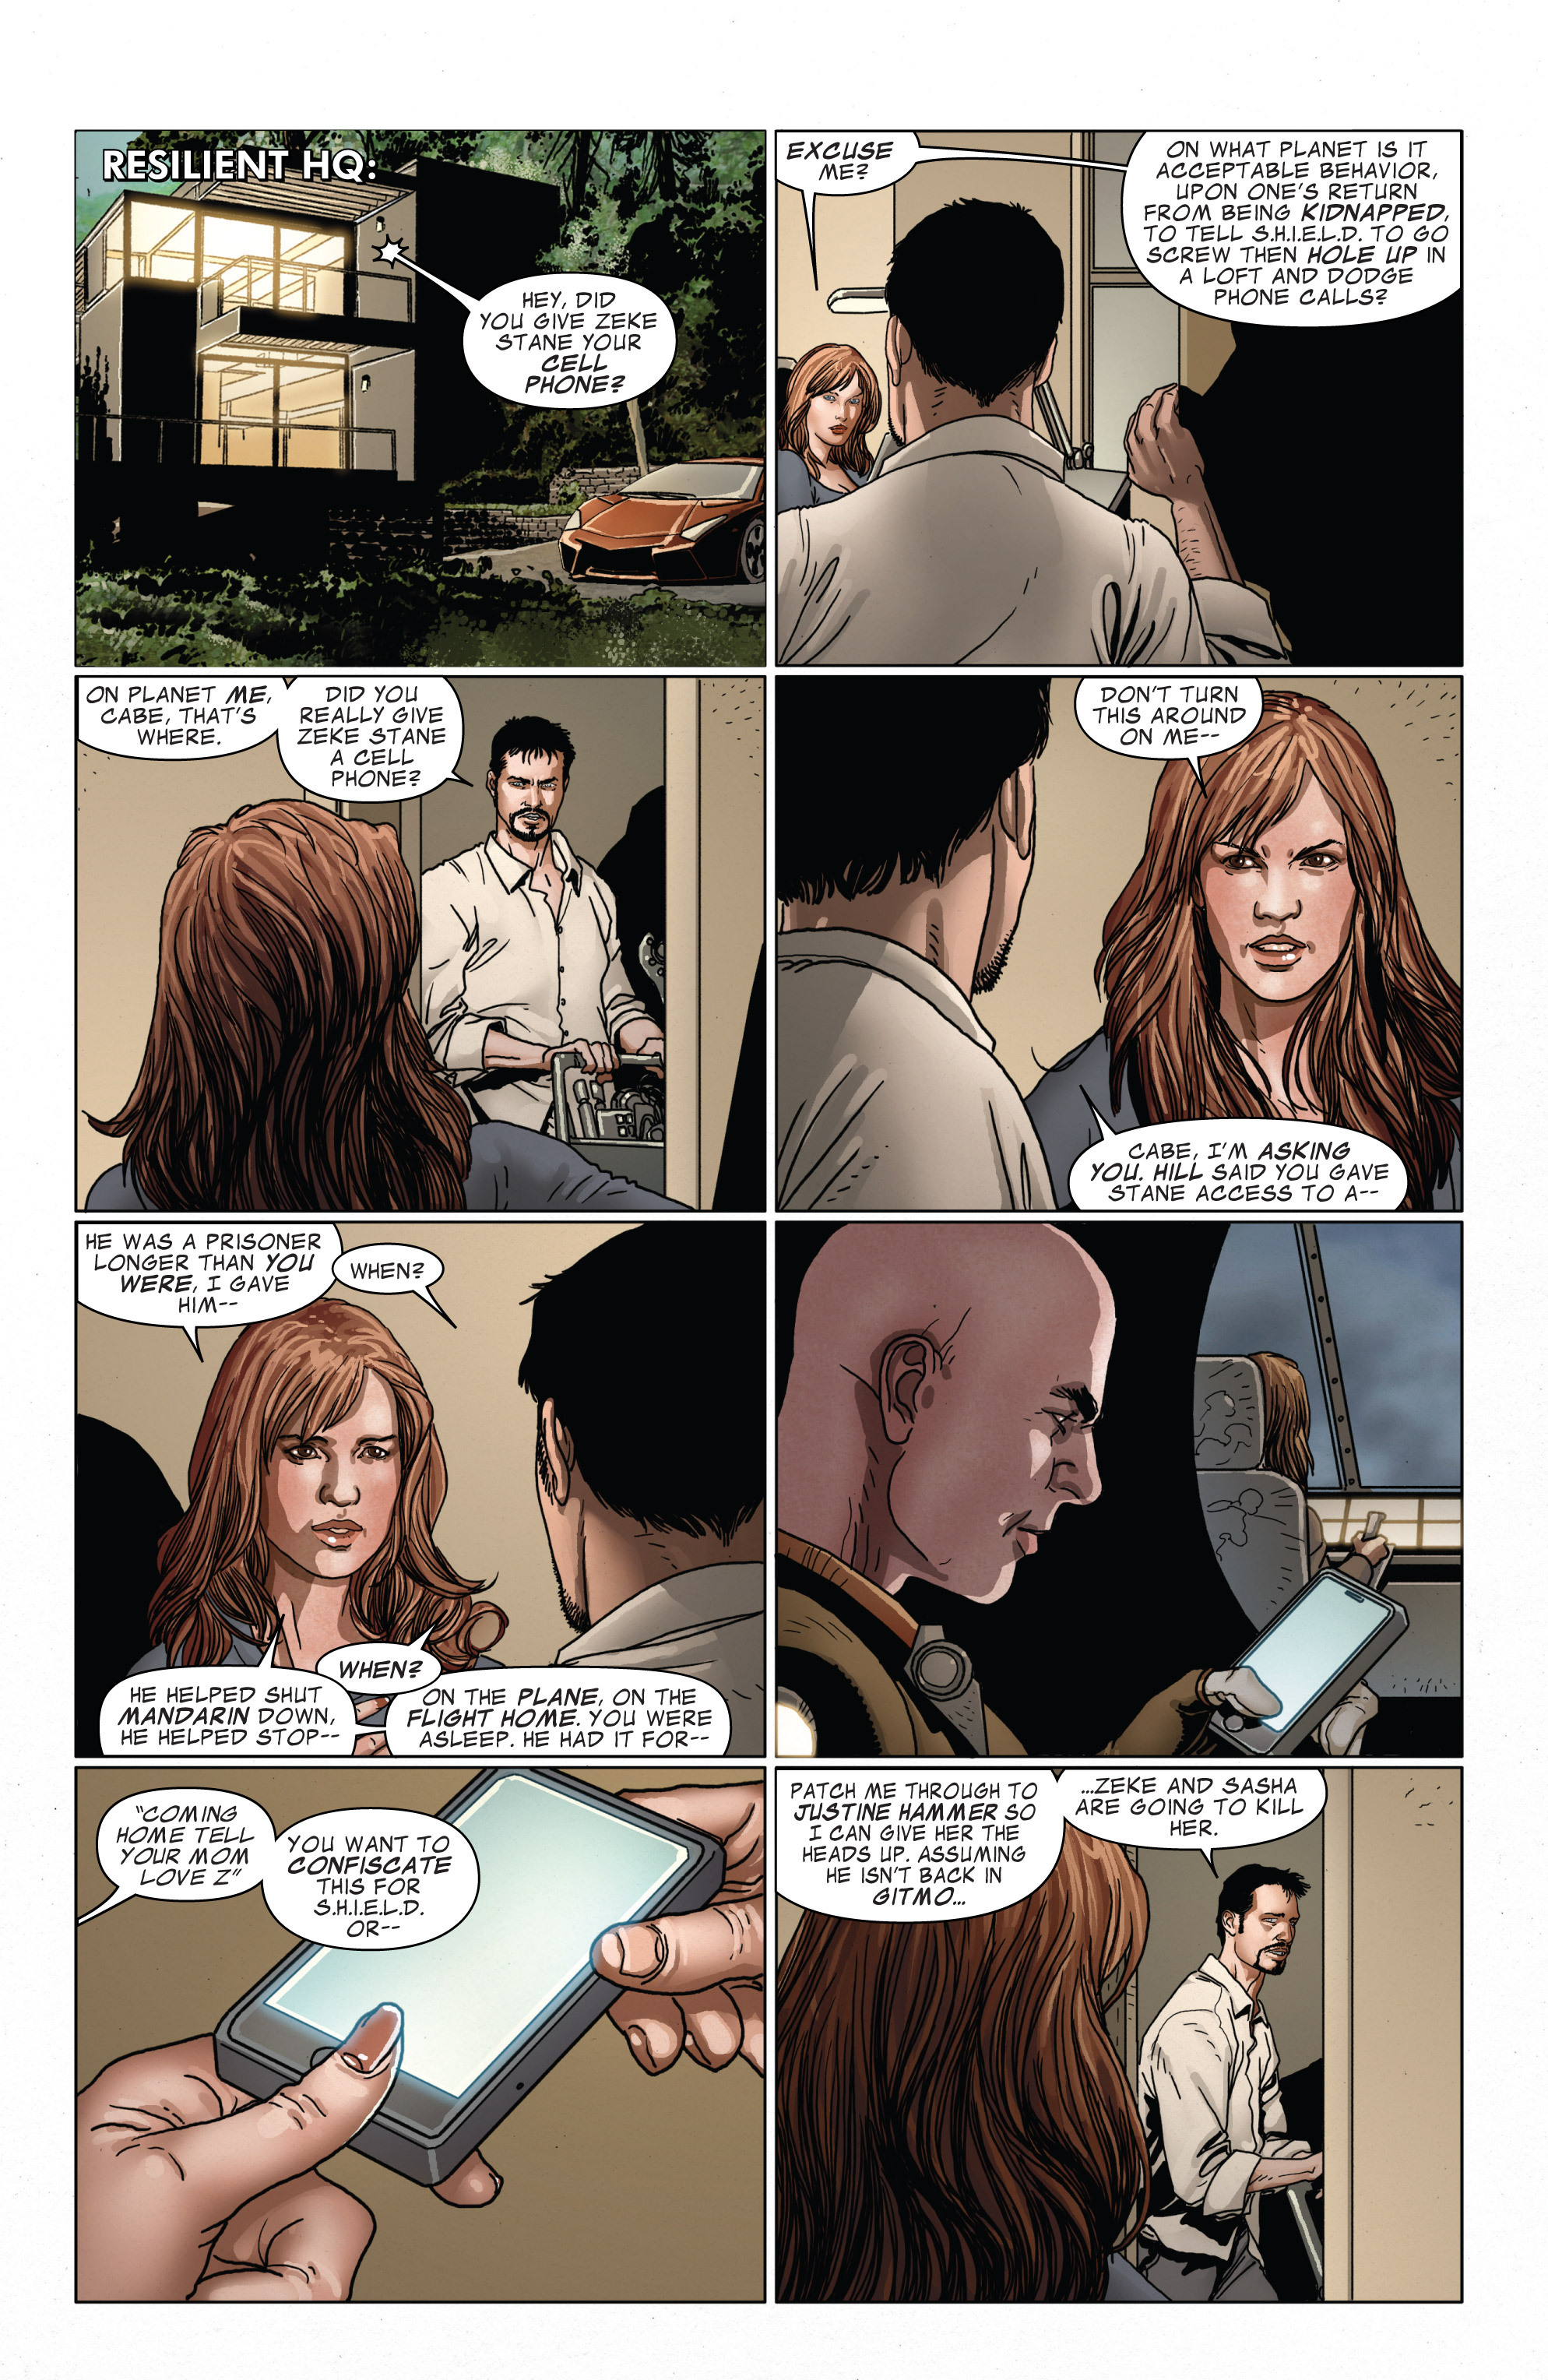 Invincible Iron Man (2008) 527 Page 14